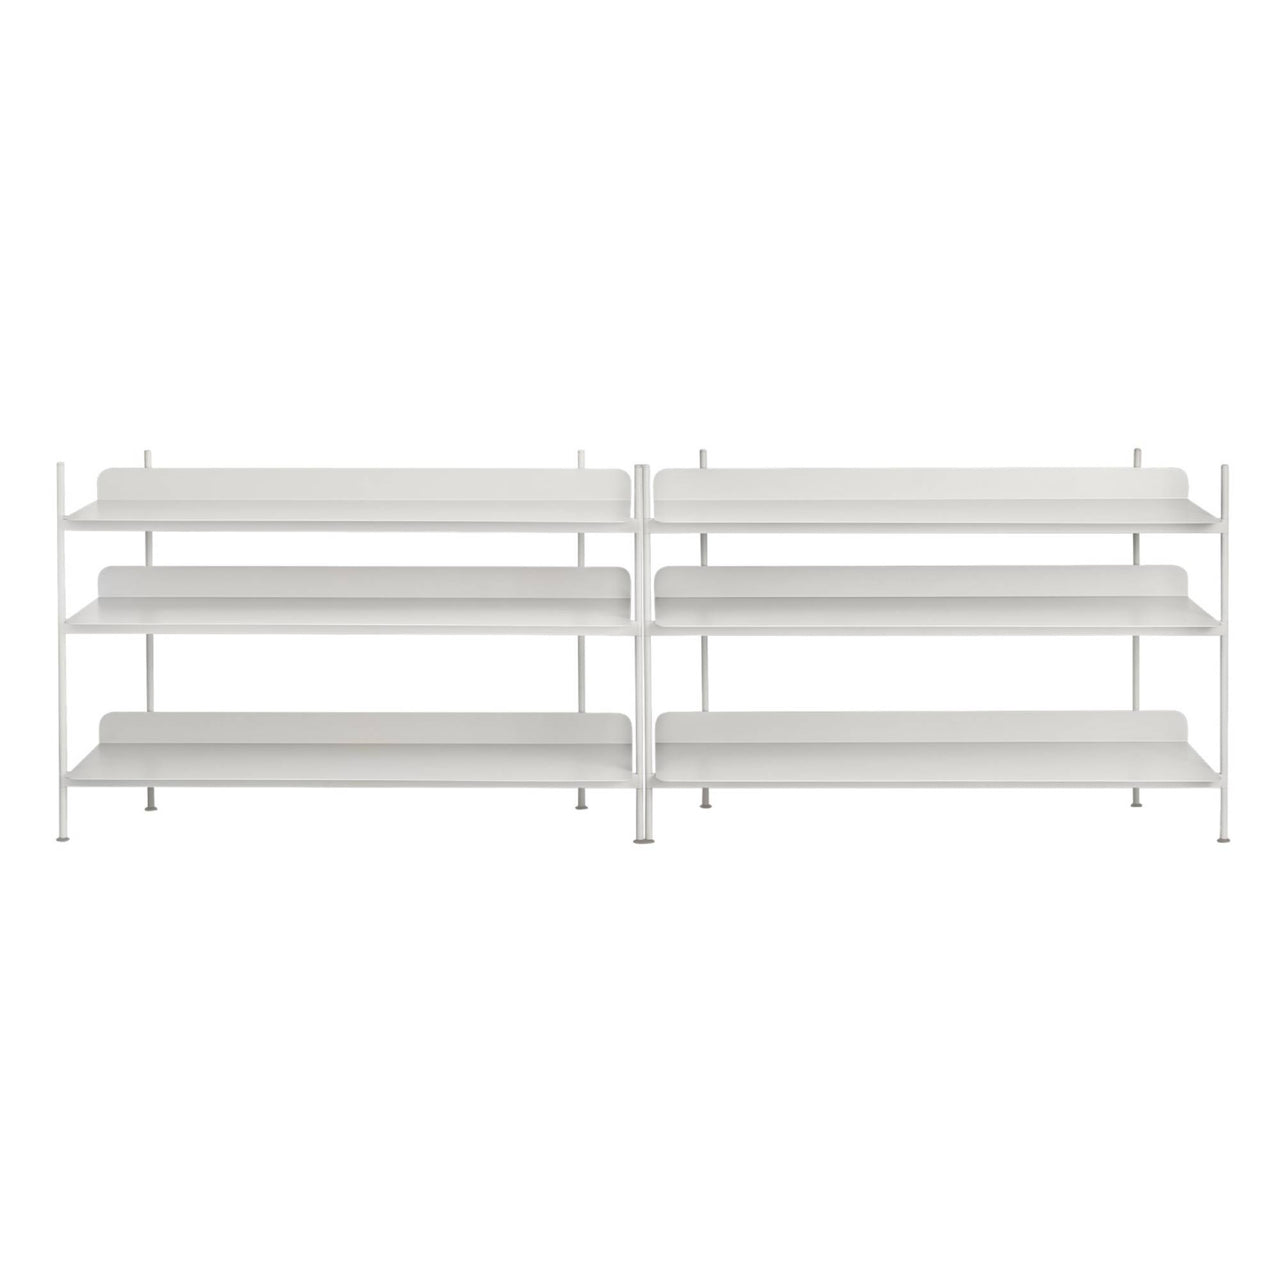 Compile Shelving System: Configuration 6 + Grey